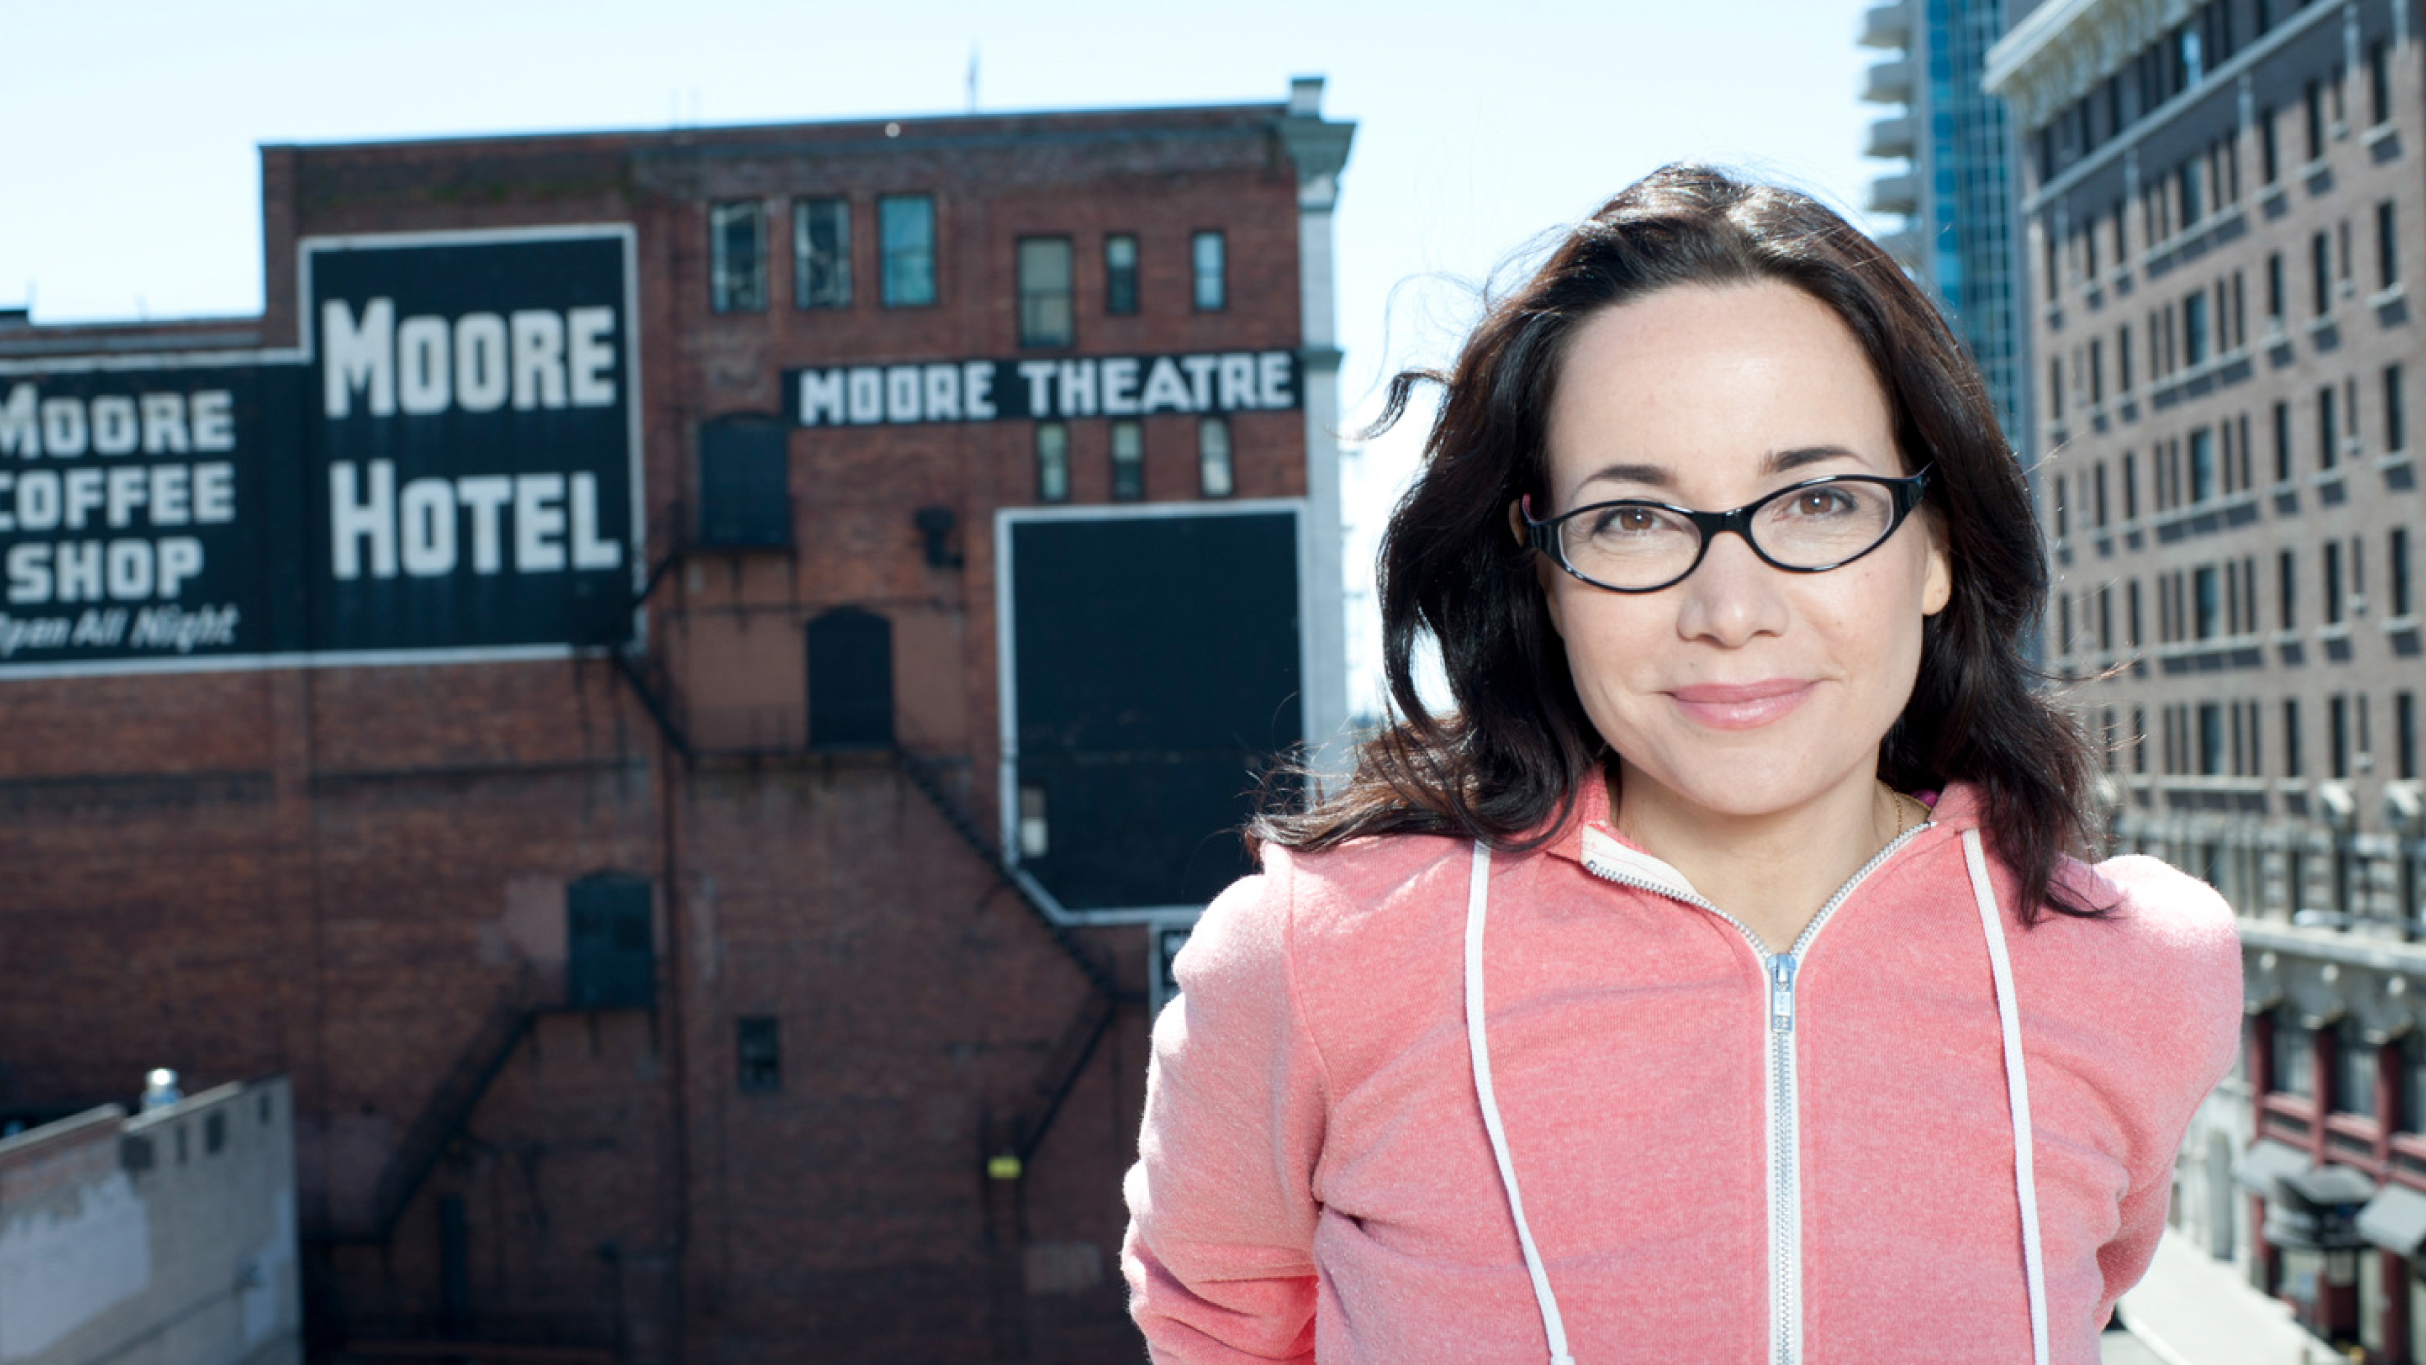 Janeane Garofalo, Phoebe Robinson, featuring Nyc's Best Comedians!